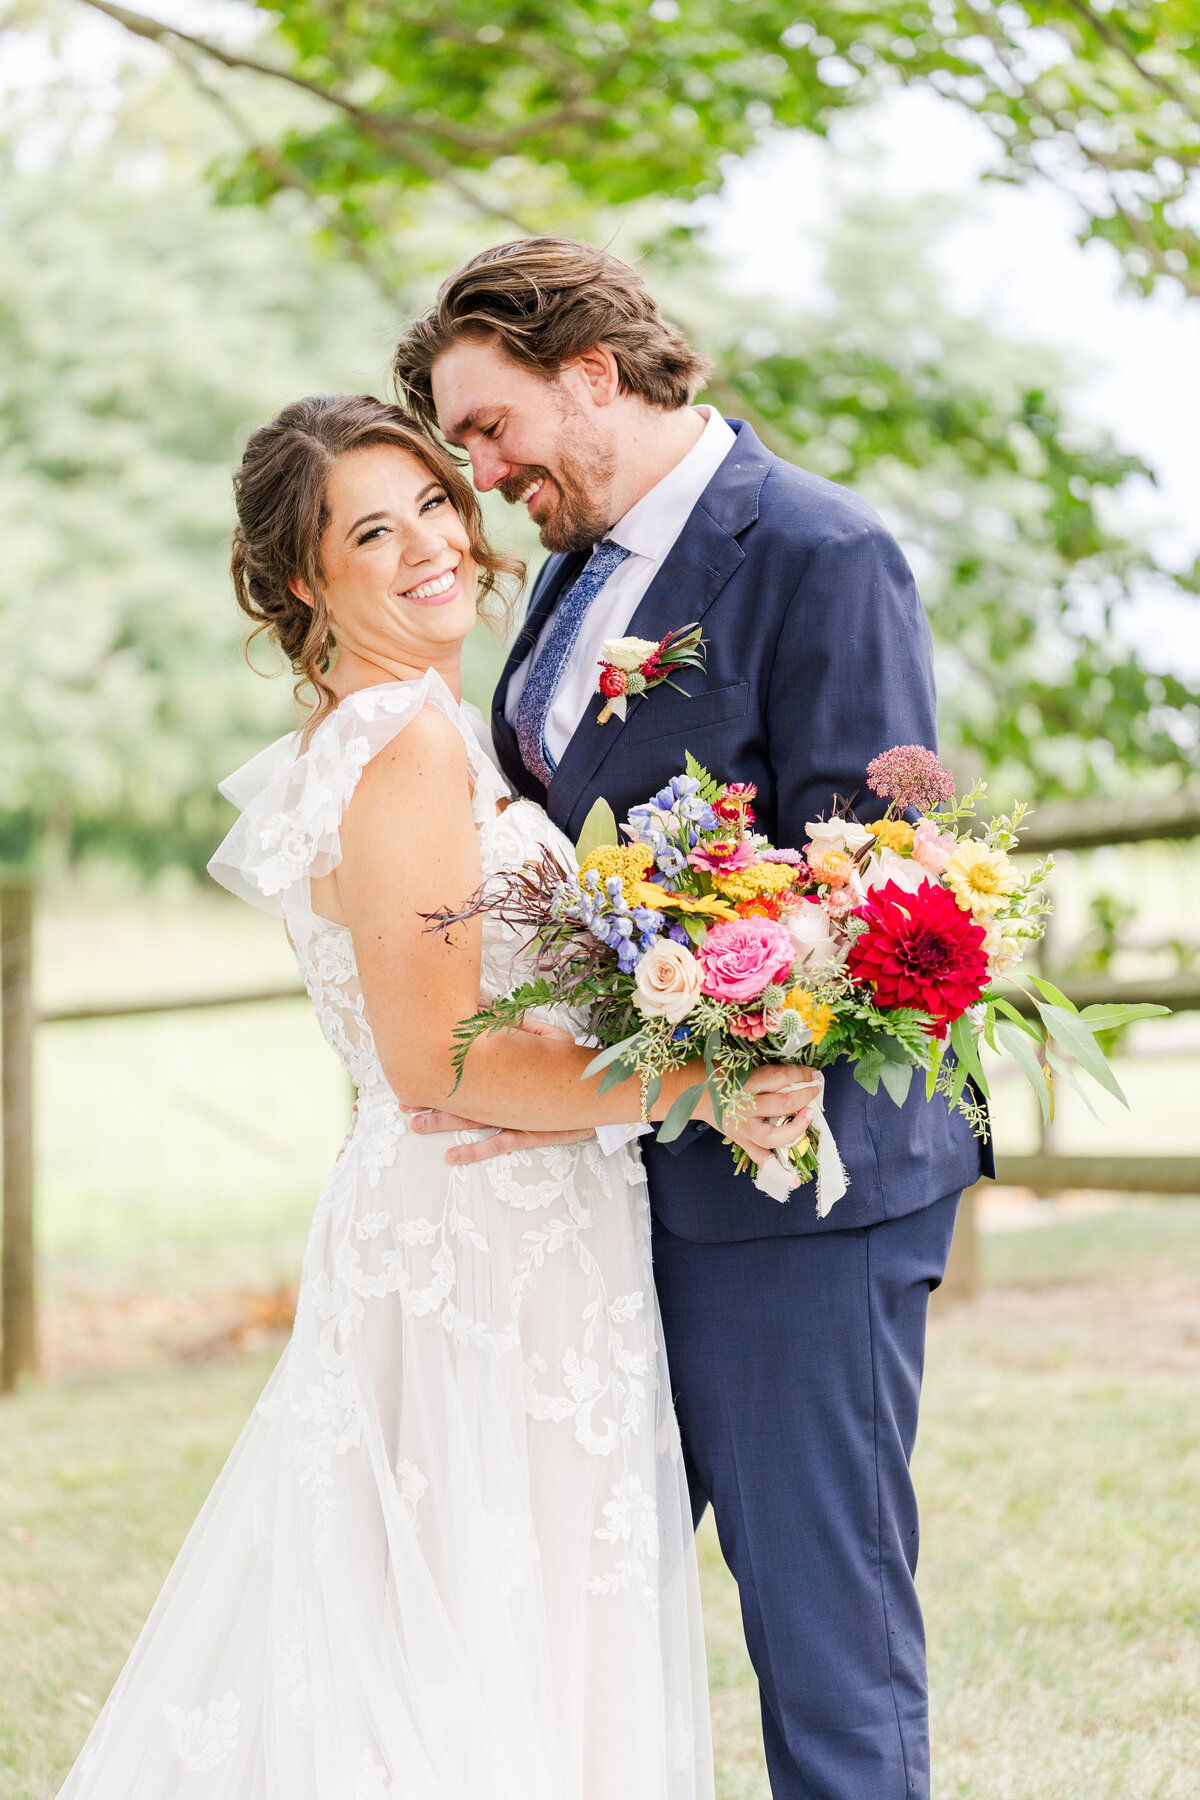 A bride and groom in a lace dress and blue suit laugh while snuggling in a field with a colorful bouquet held in front of them